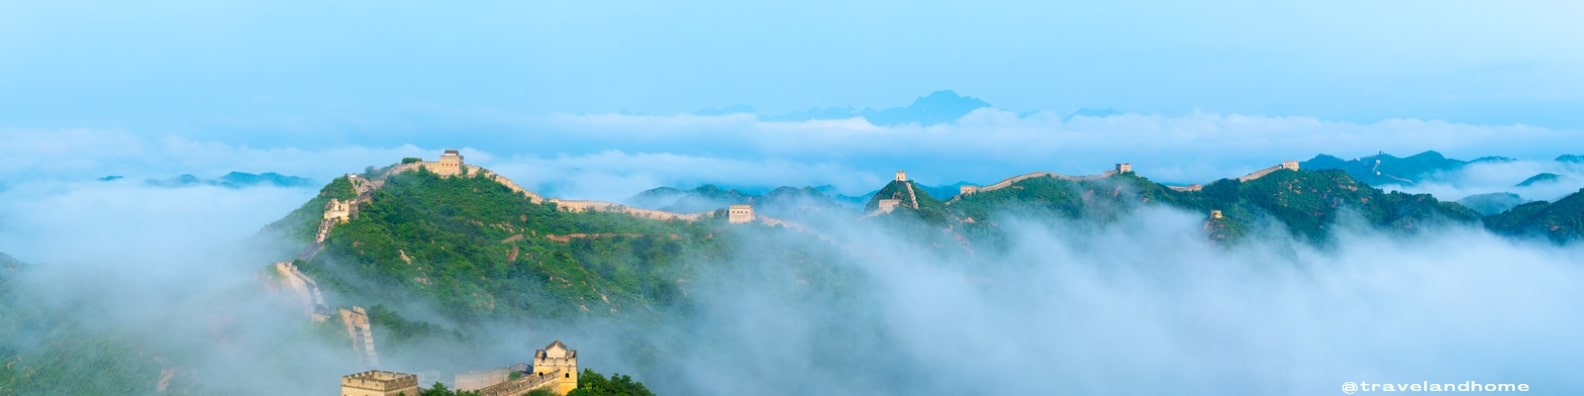 The Great Wall of China UNESCO World Heritage Site in East Asia travel and home min